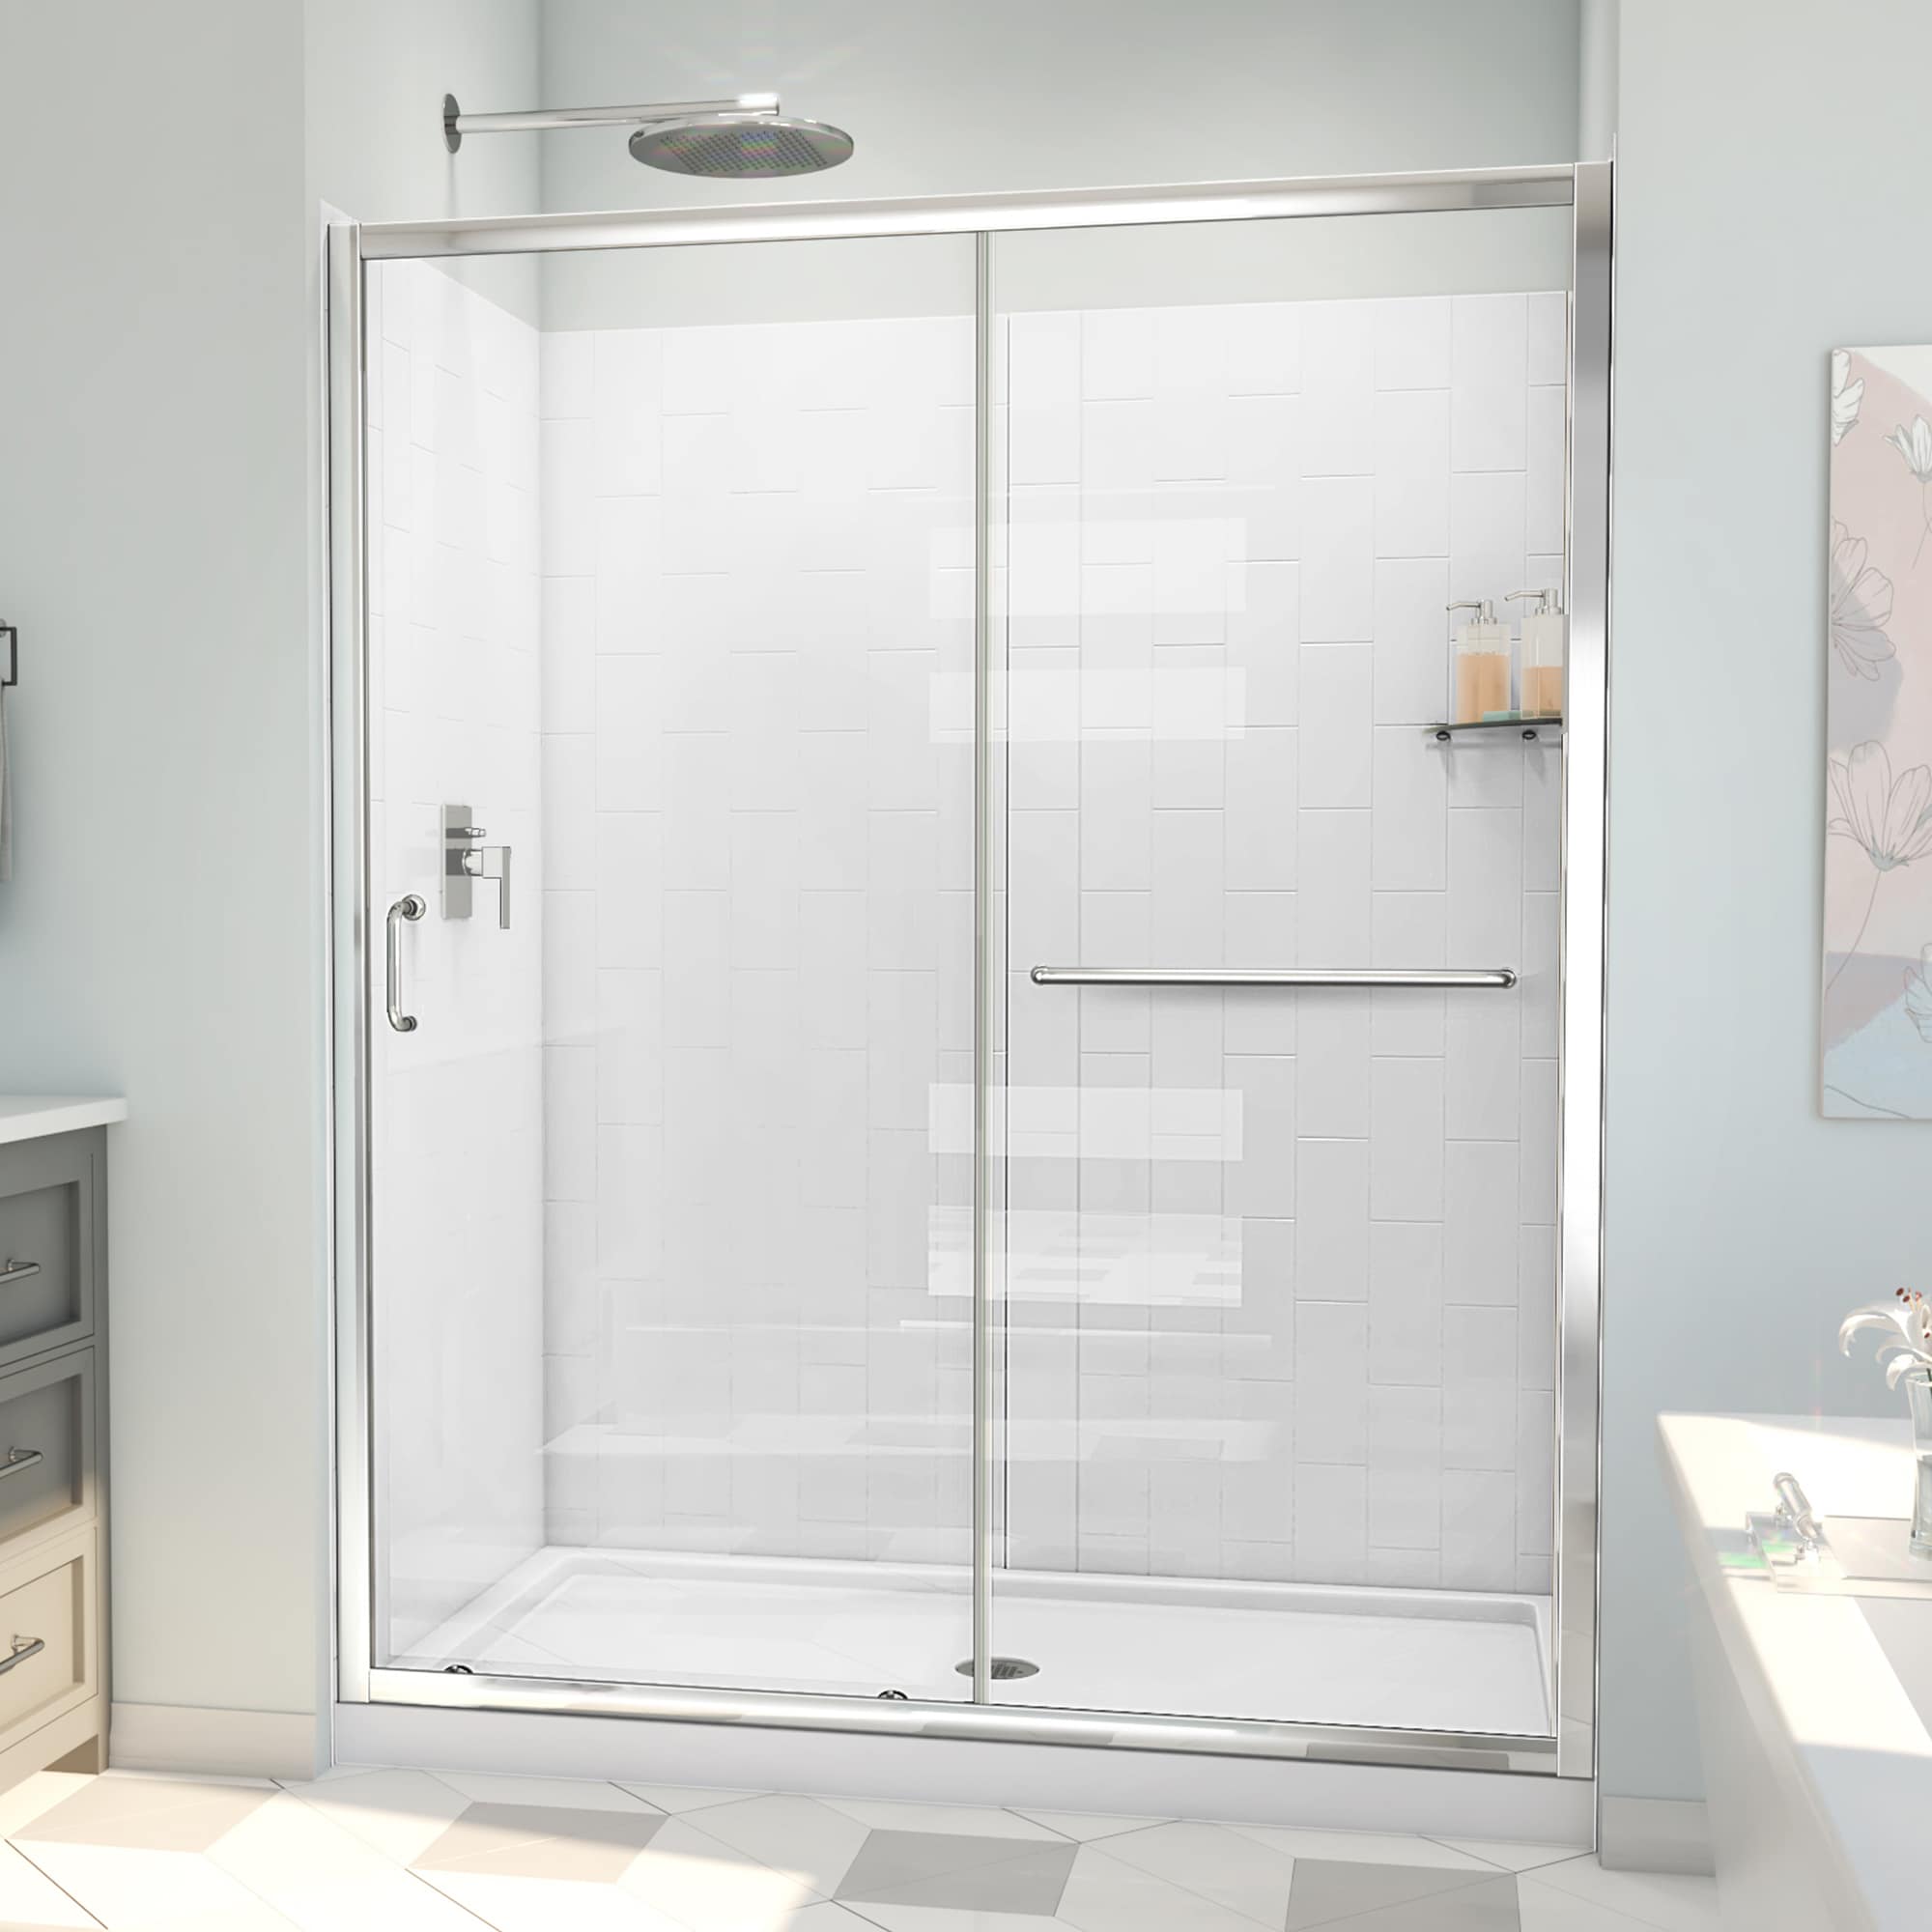 DreamLine Infinity-Z White 3-Piece 30-in x 60-in x 79-in Rectangular Alcove Shower Kit (Center Drain) with Base, Wall and Door Included